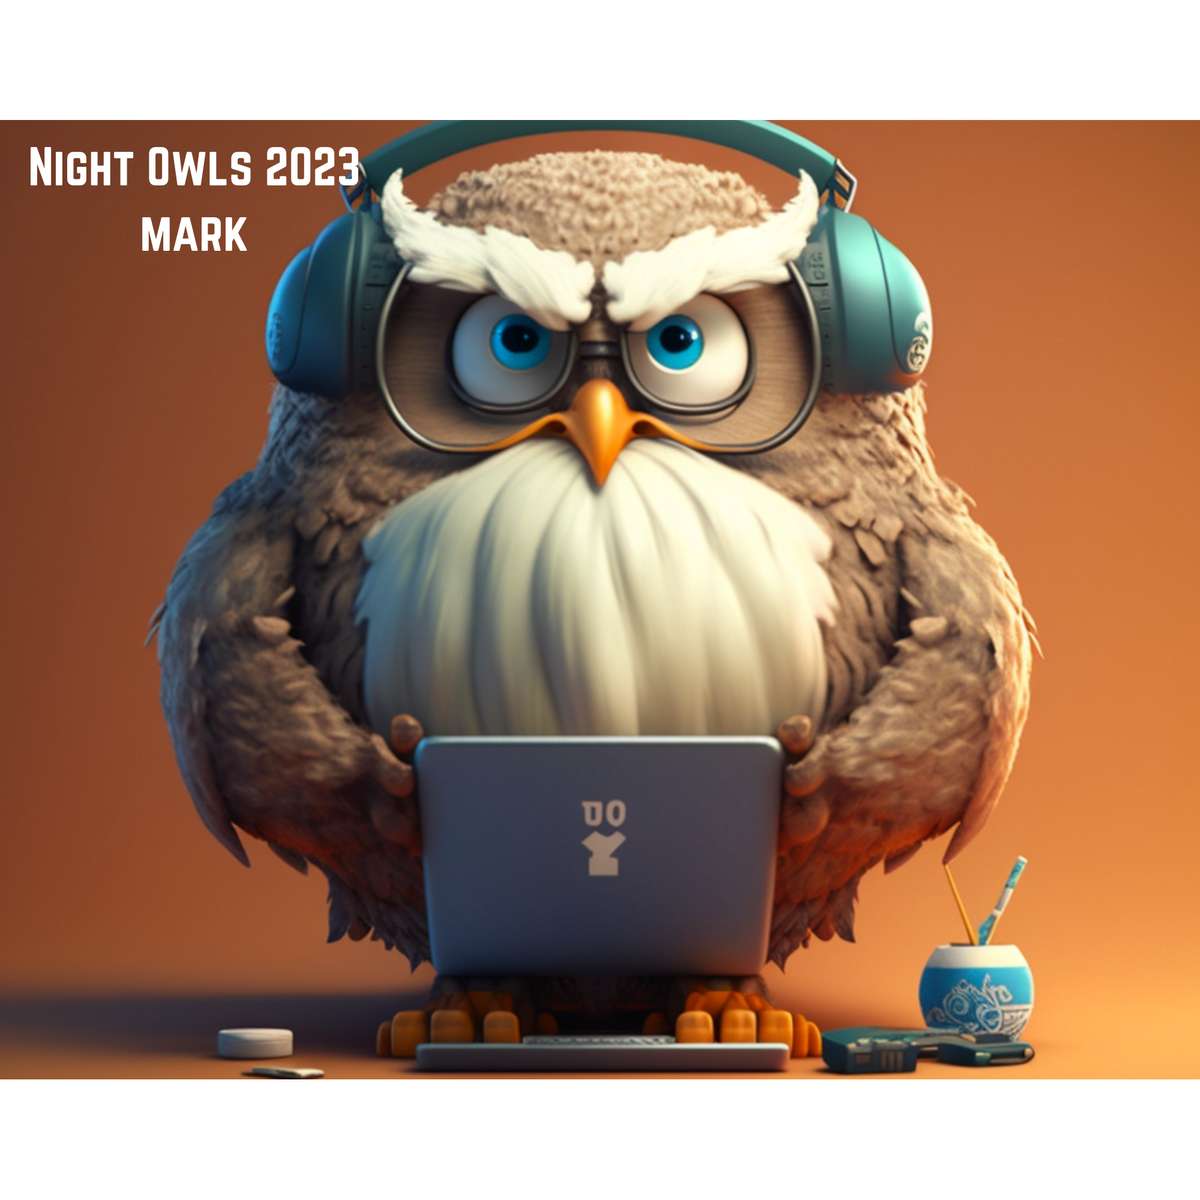 Mark Night Owls 2023 online puzzle